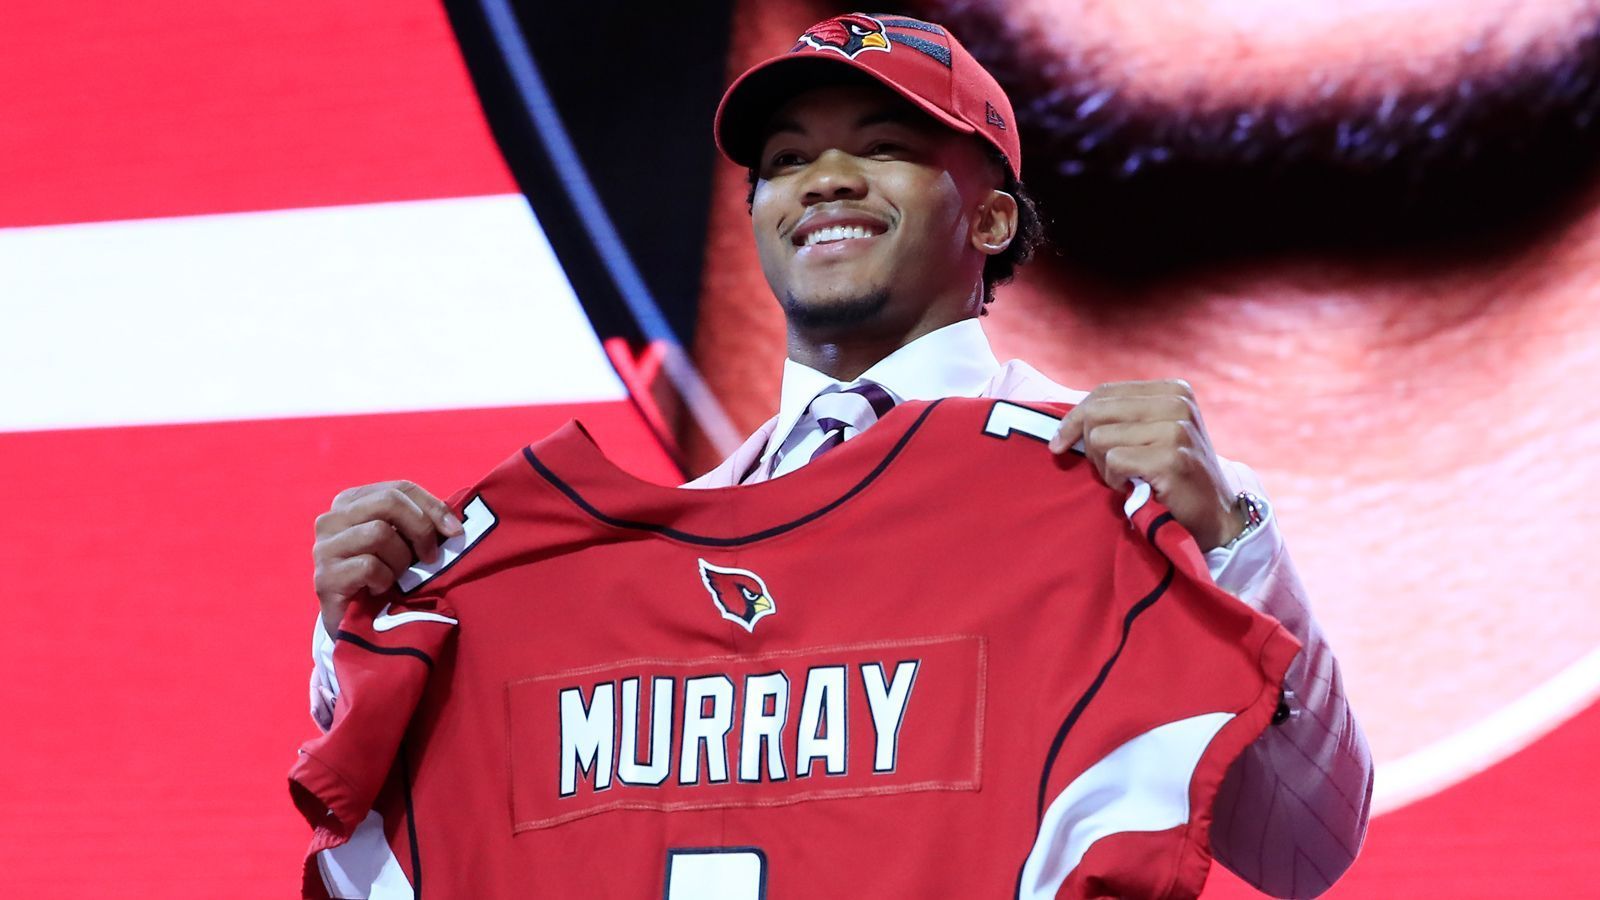 
                <strong>Arizona Cardinals</strong><br>
                &#x2022; 1. Runde (Pick 16: Zaven Collins) - <br>&#x2022; 2. Runde (Pick 49: Rondale Moore) - <br>&#x2022; 4. Runde (Pick 136: Marco Wilson) -<br>&#x2022; 6. Runde (Pick 210: Victor Dimukeje) -<br>&#x2022; 7. Runde (Pick 223: Tay Gowan, Pick 243: James Wiggins, Pick 247: Michal Menet) <br>
              